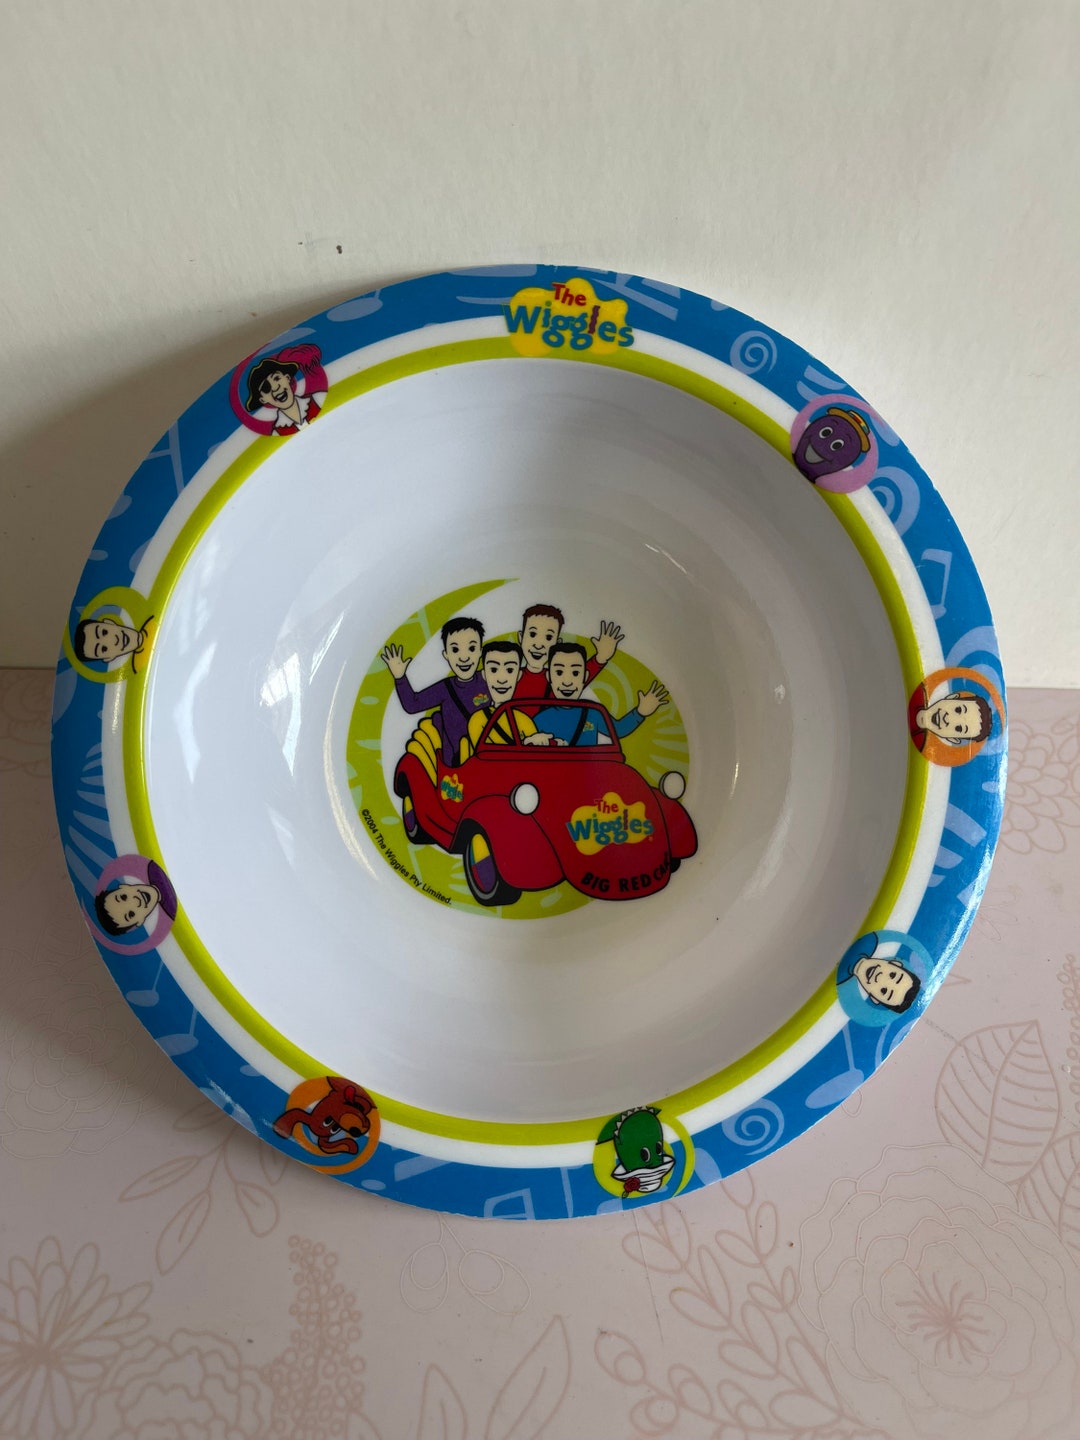 The Wiggles Bowl the Wiggles Baby Bowl Children's Dinner - Etsy